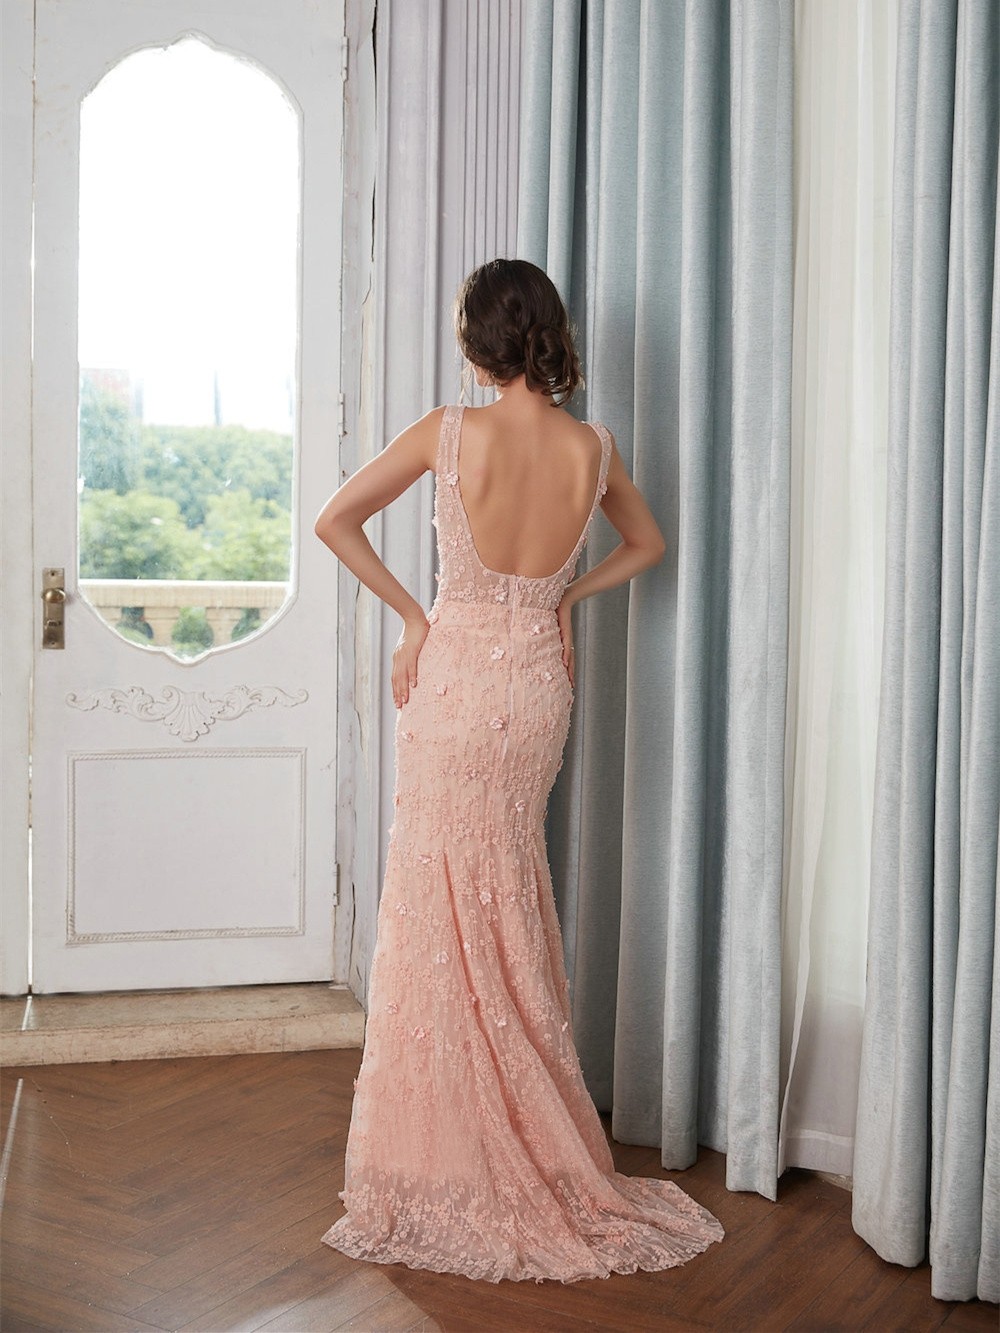 Mermaid Square Neck Backless Blush Pink Colored Lace